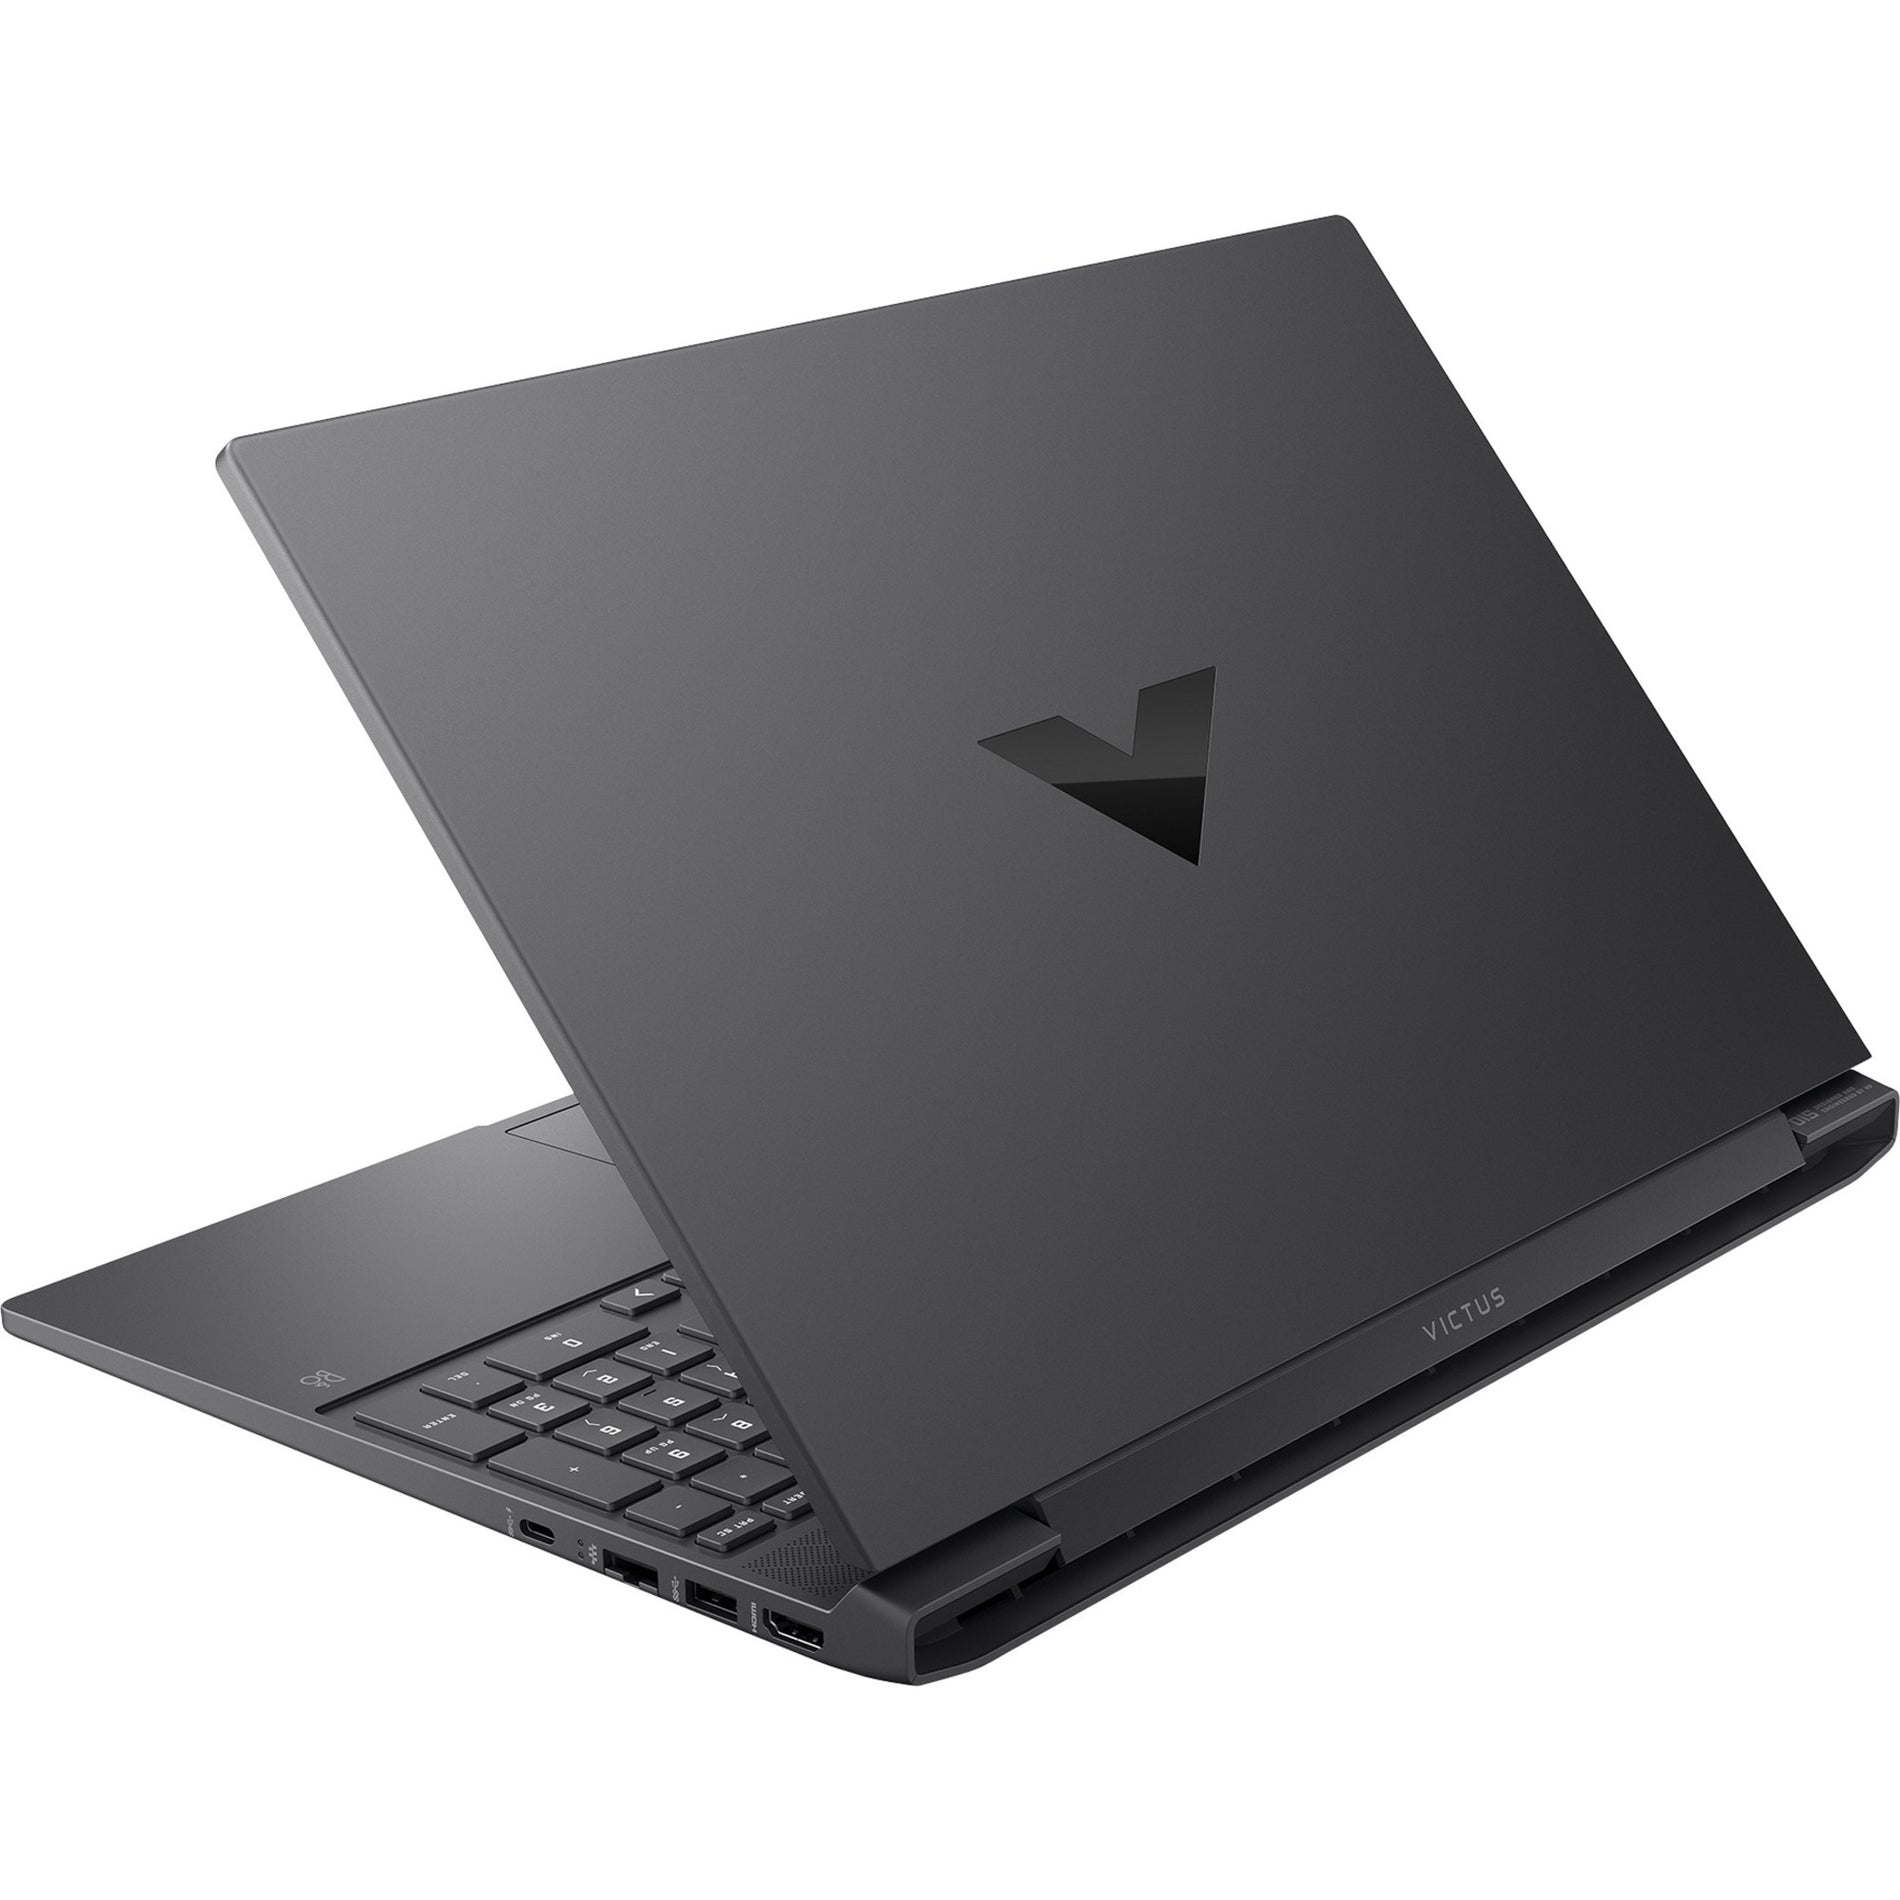 HPI SOURCING - NEW Victus Gaming Laptop 15-fa0031dx, Full HD, Intel Core i5, 8GB RAM, 512GB SSD, Mica Silver